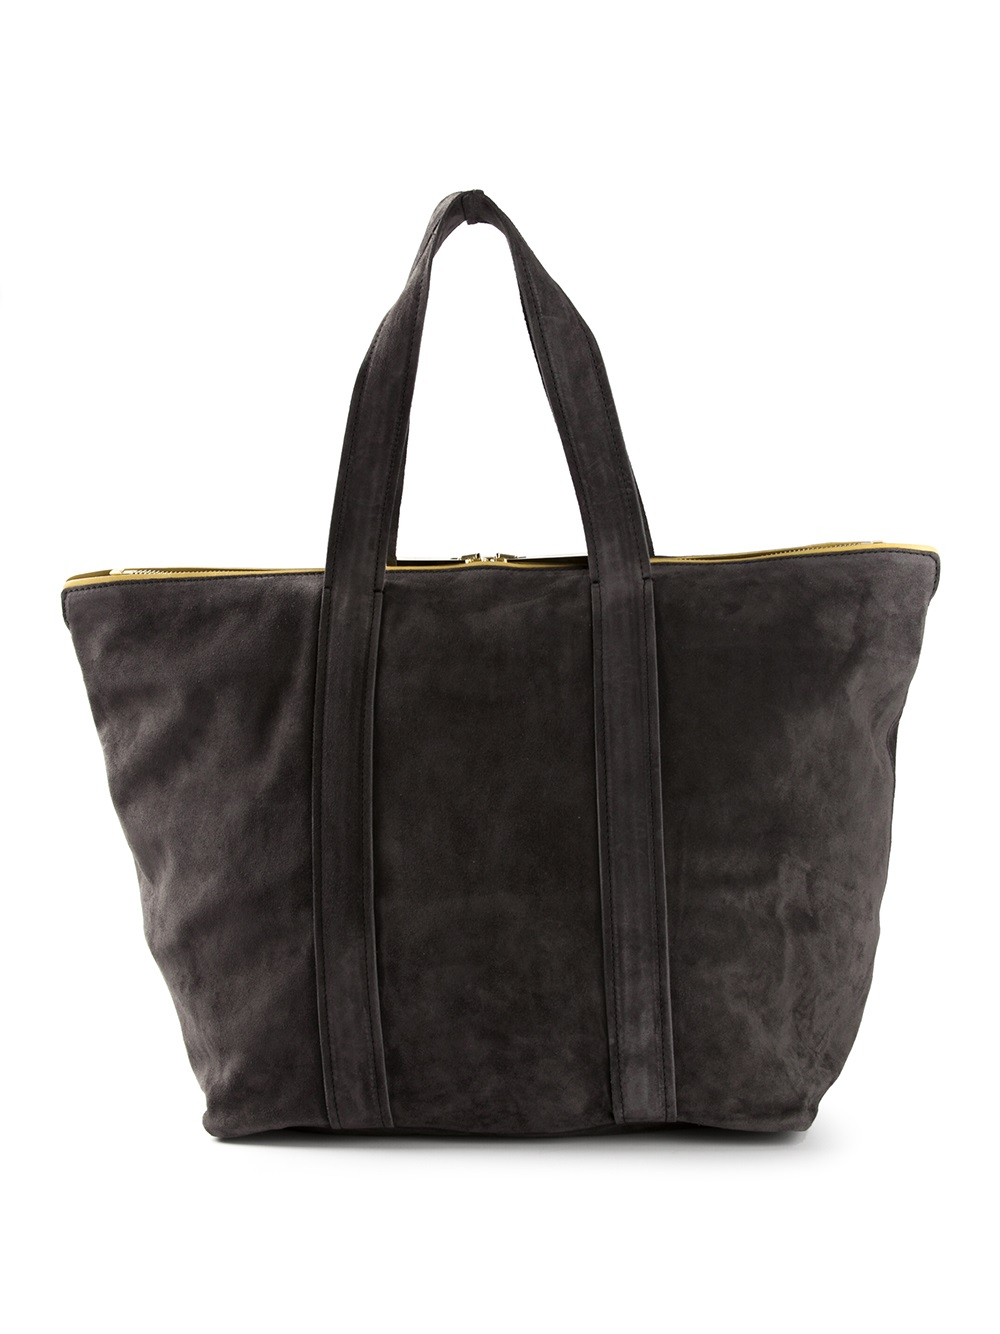 Vanessa Bruno Large Suede Tote Bag in Grey (Gray) - Lyst